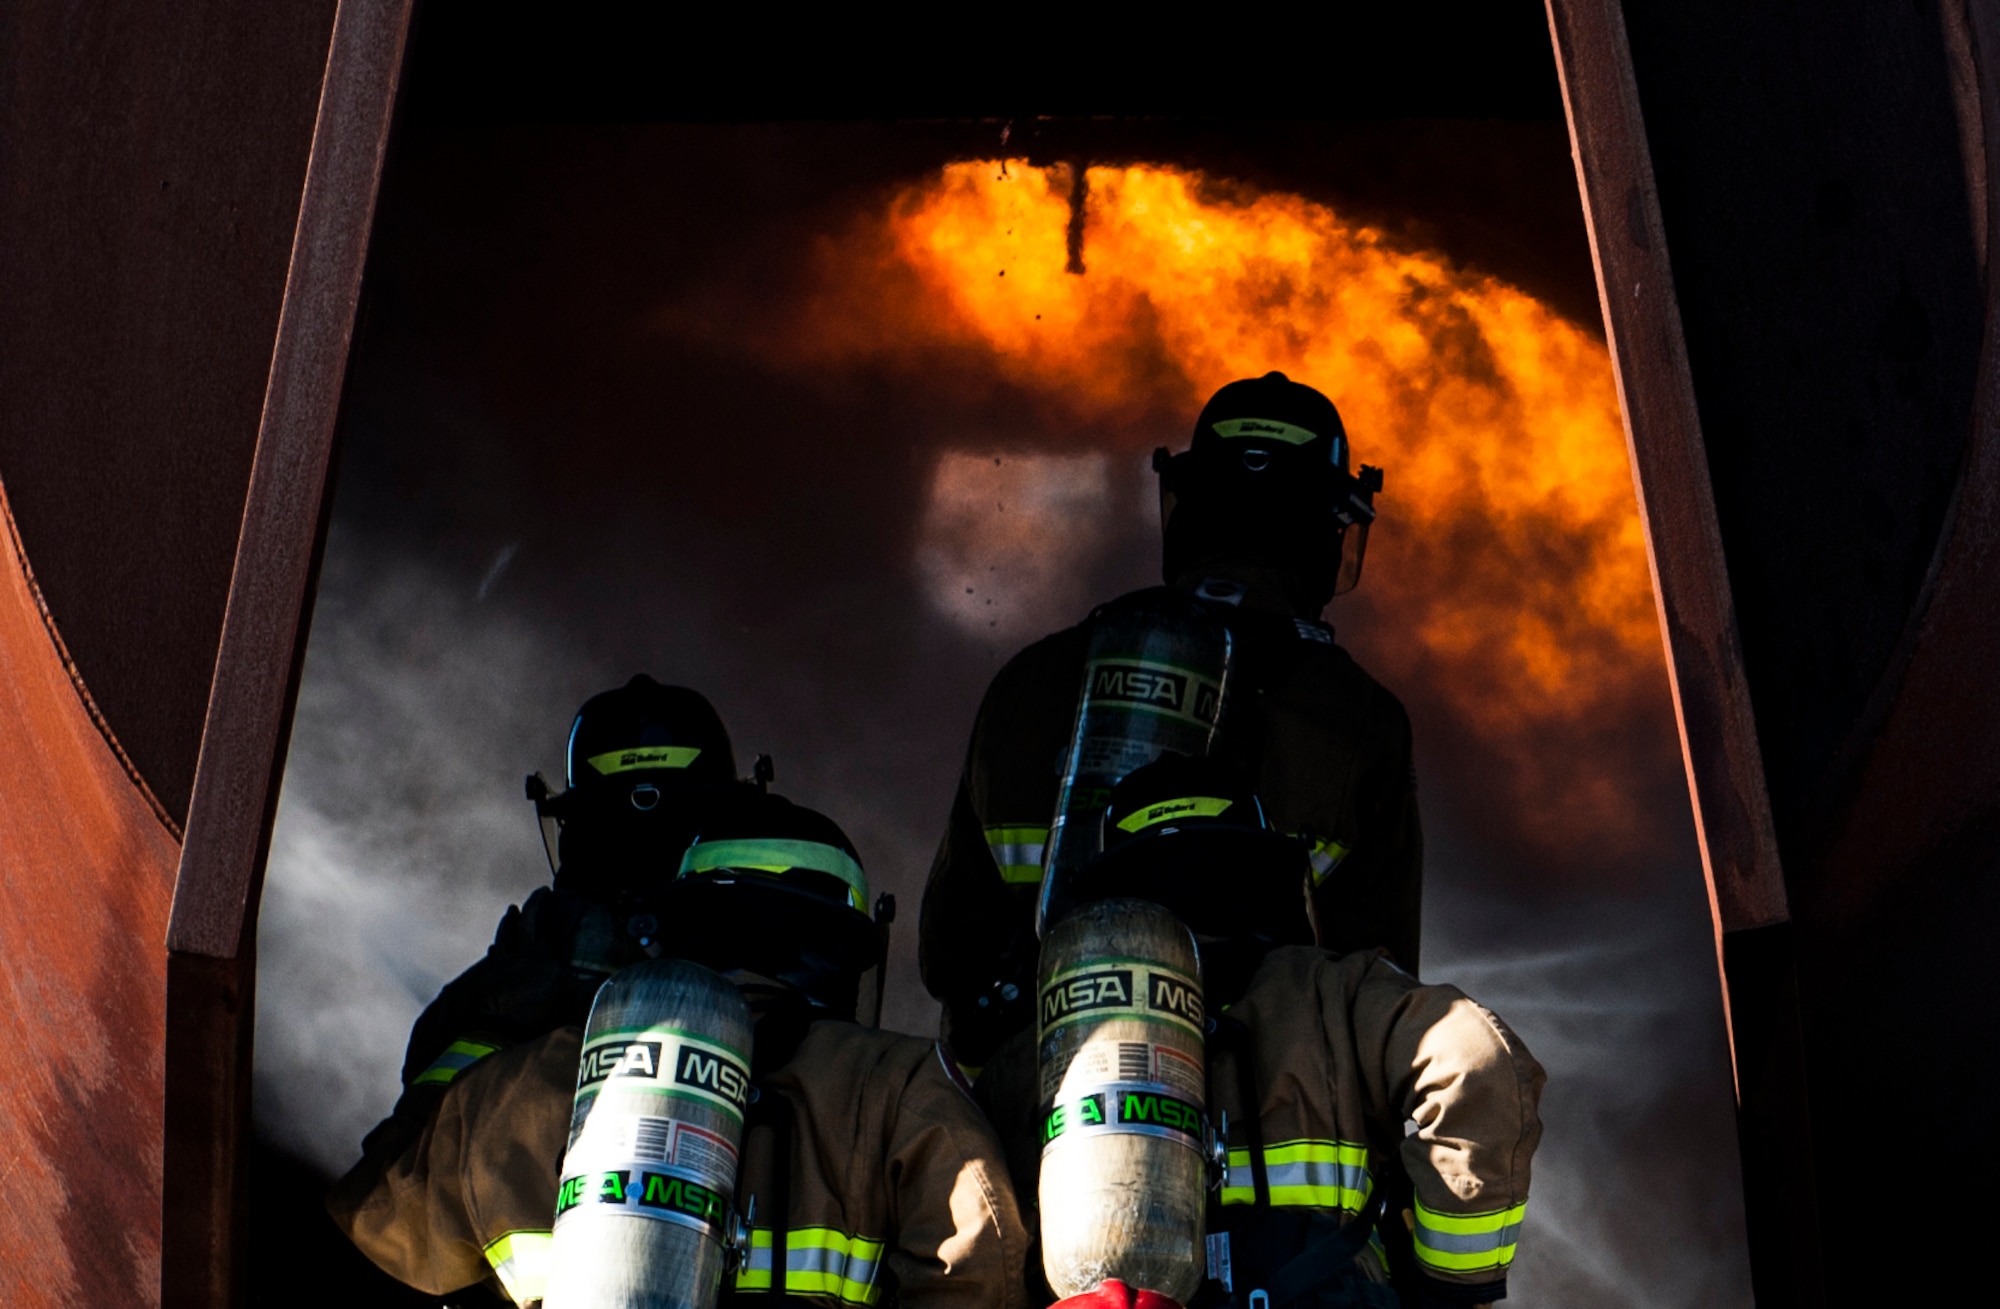 Firefighters, assigned to the 99th Civil Engineer Squadron Fire Protection Flight, enter the mock shell of an aircraft to perform controlled burn training at Nellis Air Force Base, Nev., Oct. 6, 2016. The NCFD will be hosting an Open House at Fire Station 1 on Nellis AFB, where they will be giving tours of the fire station to anyone that stops in. (U.S. Air Force photo by Airman 1st Class Kevin Tanenbaum/Released)